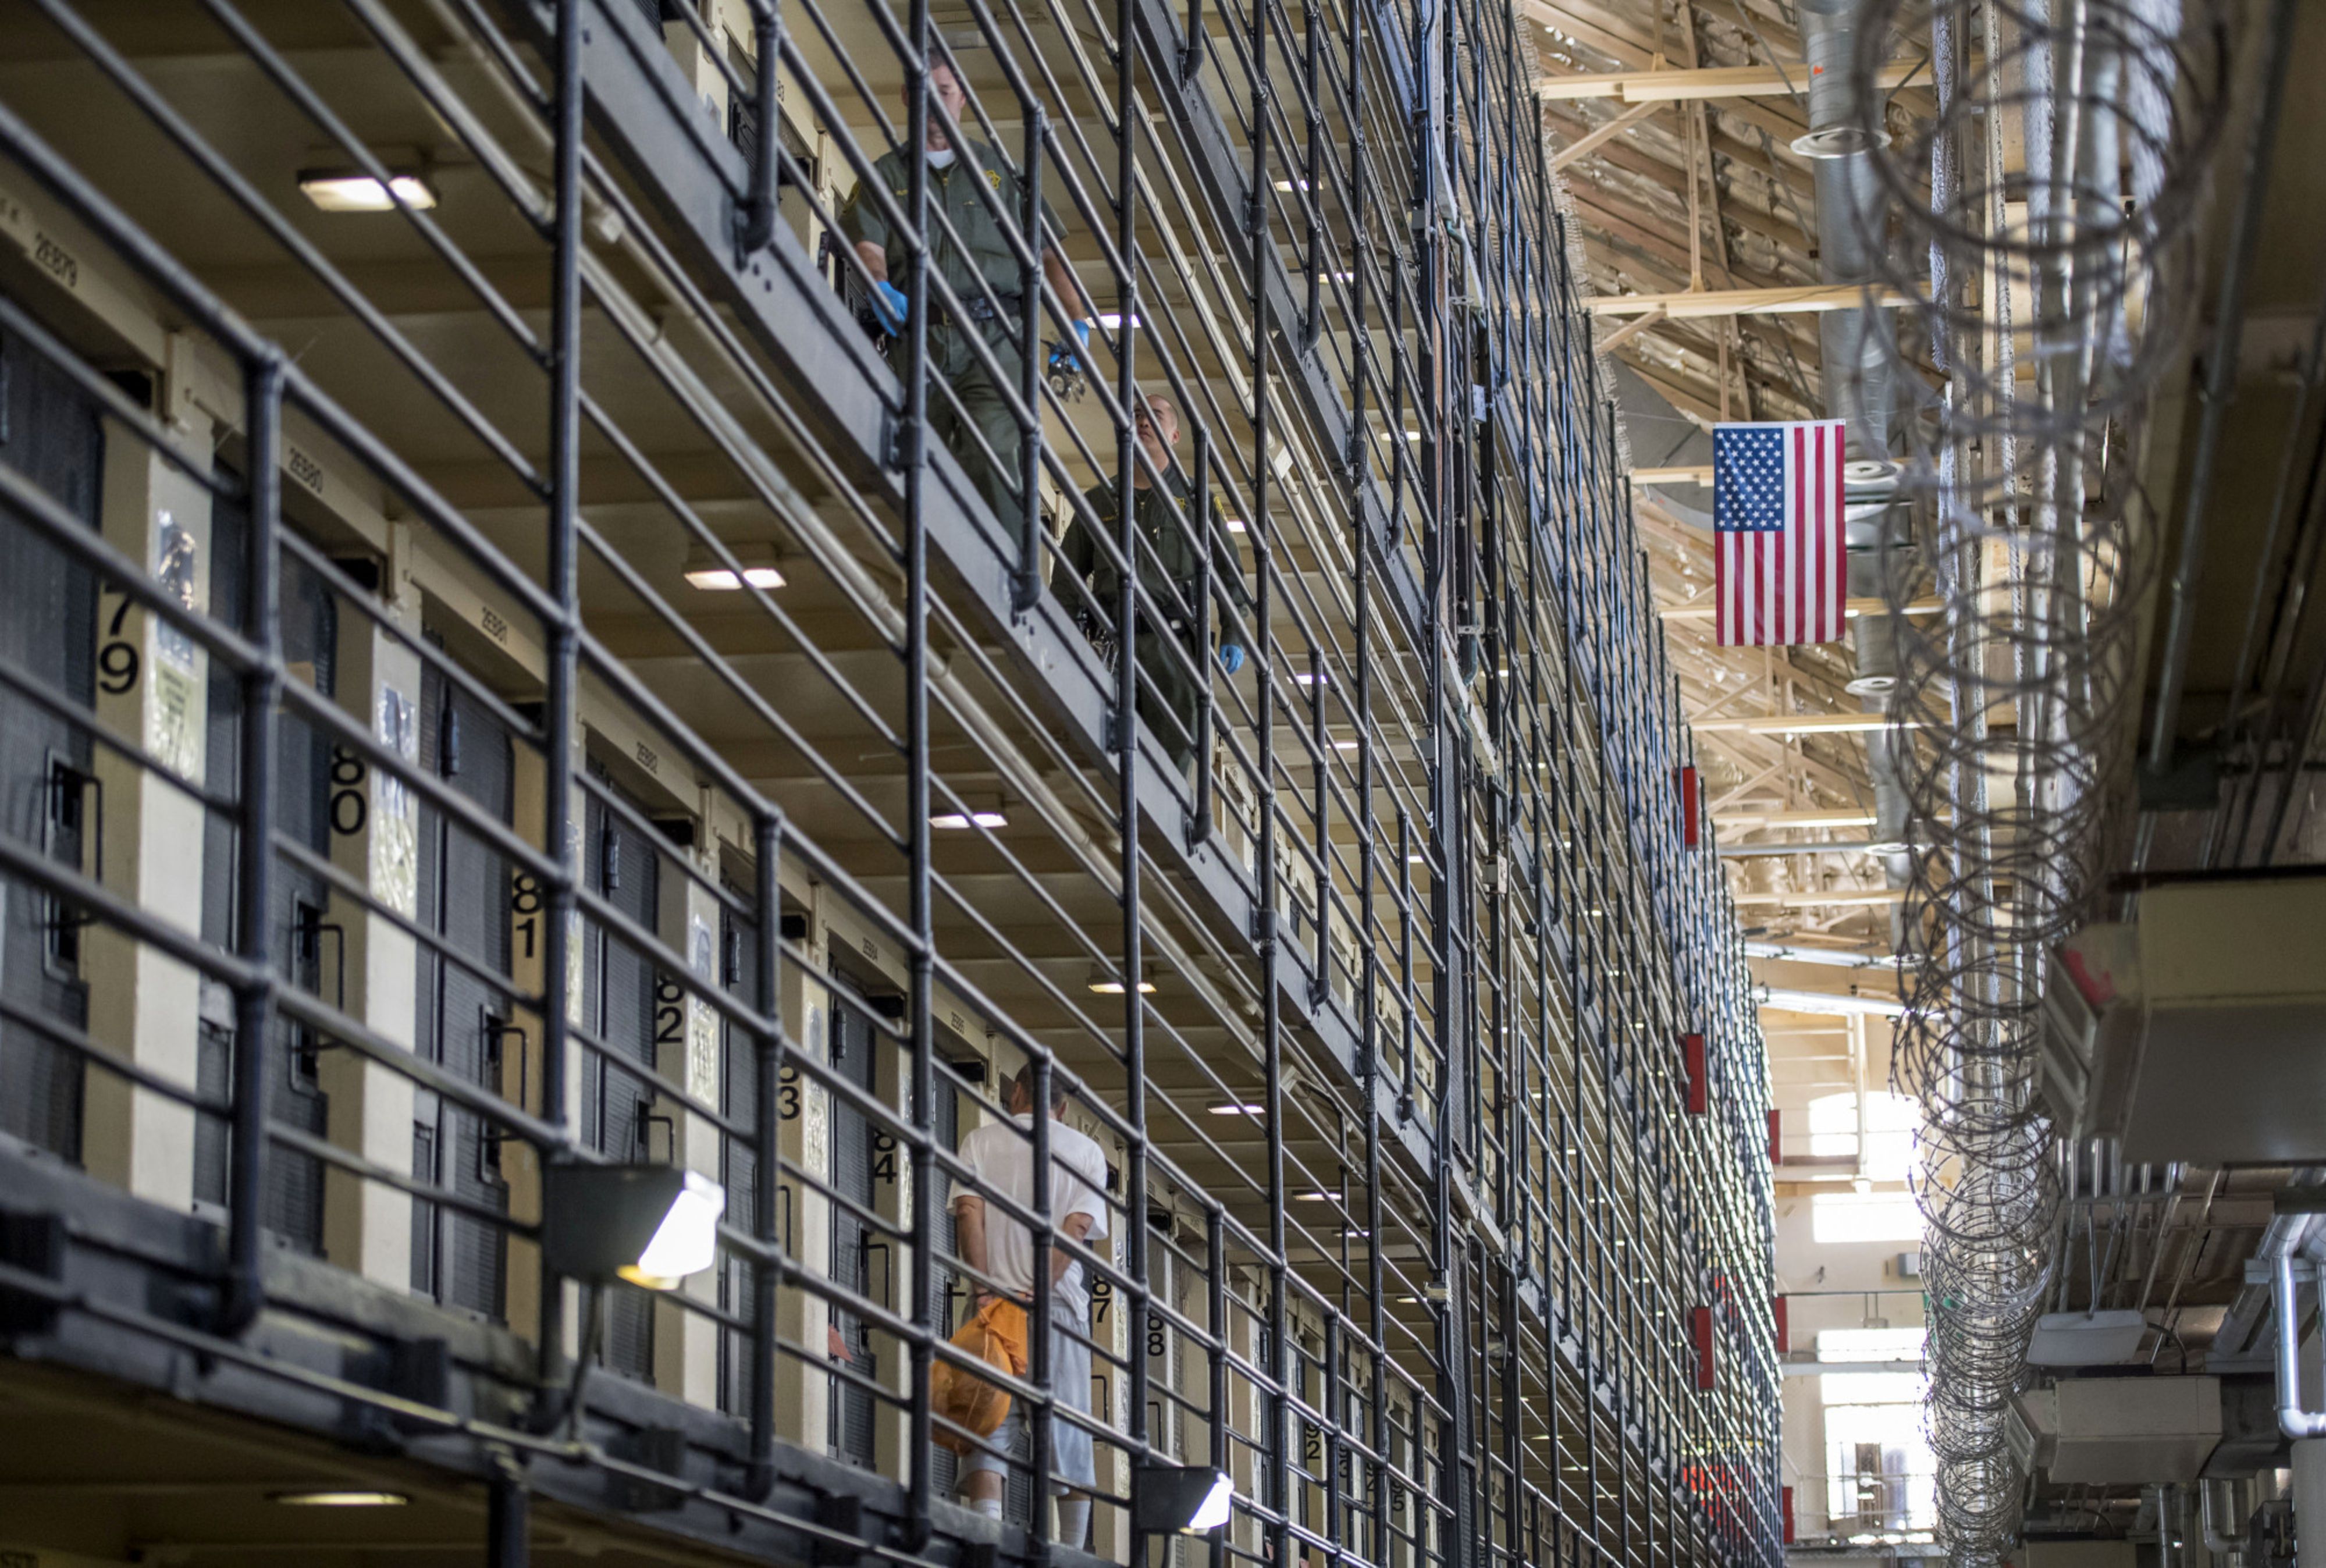 Push to limit prison and jail fees hits early obstacle in Virginia House